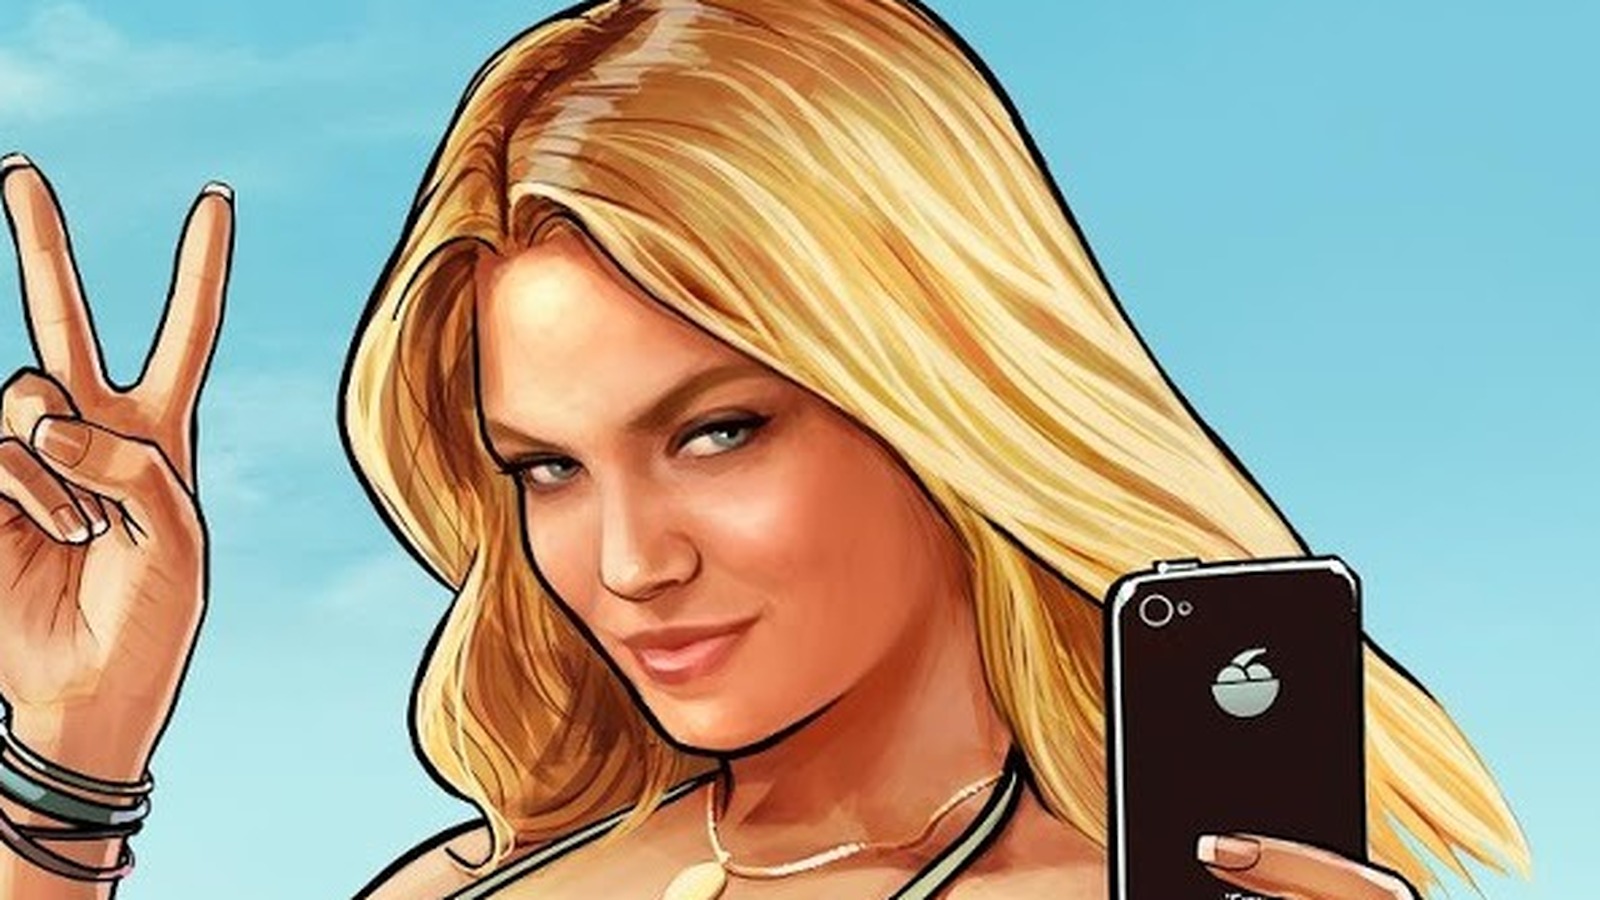 Why isn't there Grand Theft Auto 5 Mobile? - Grand Theft Auto V